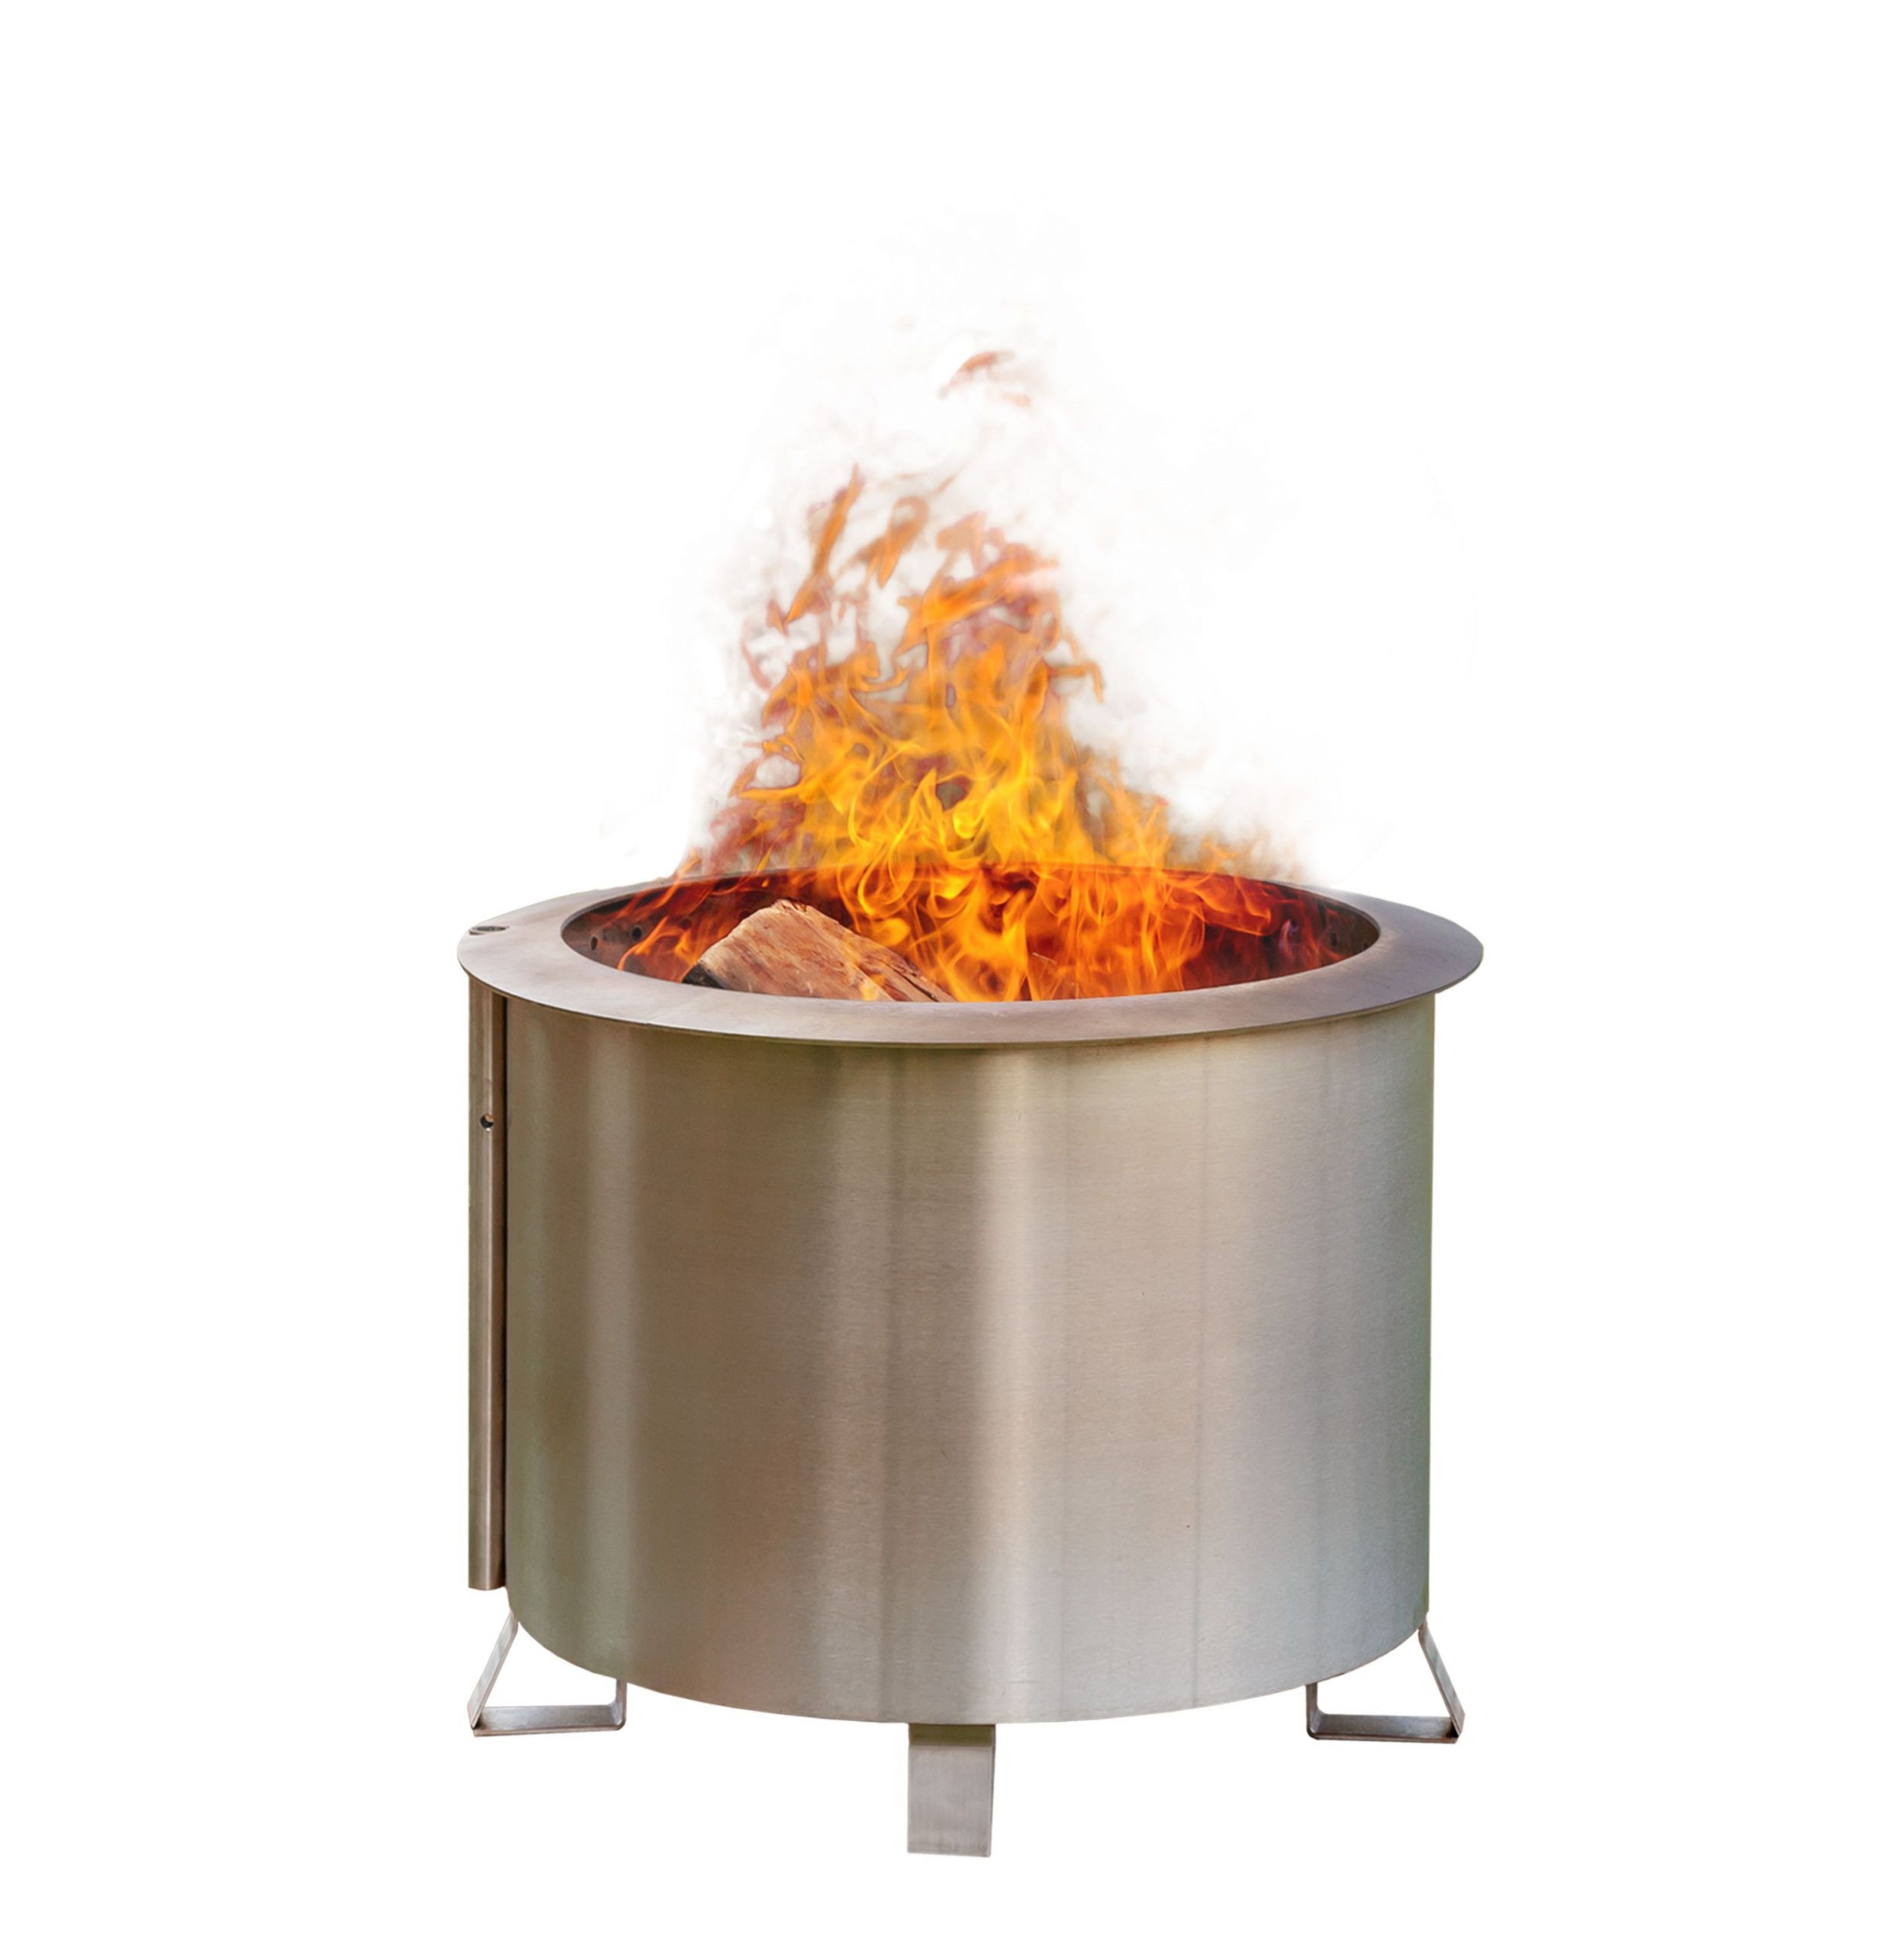 Double Flame Patio Fire Pit
 DOUBLE FLAME